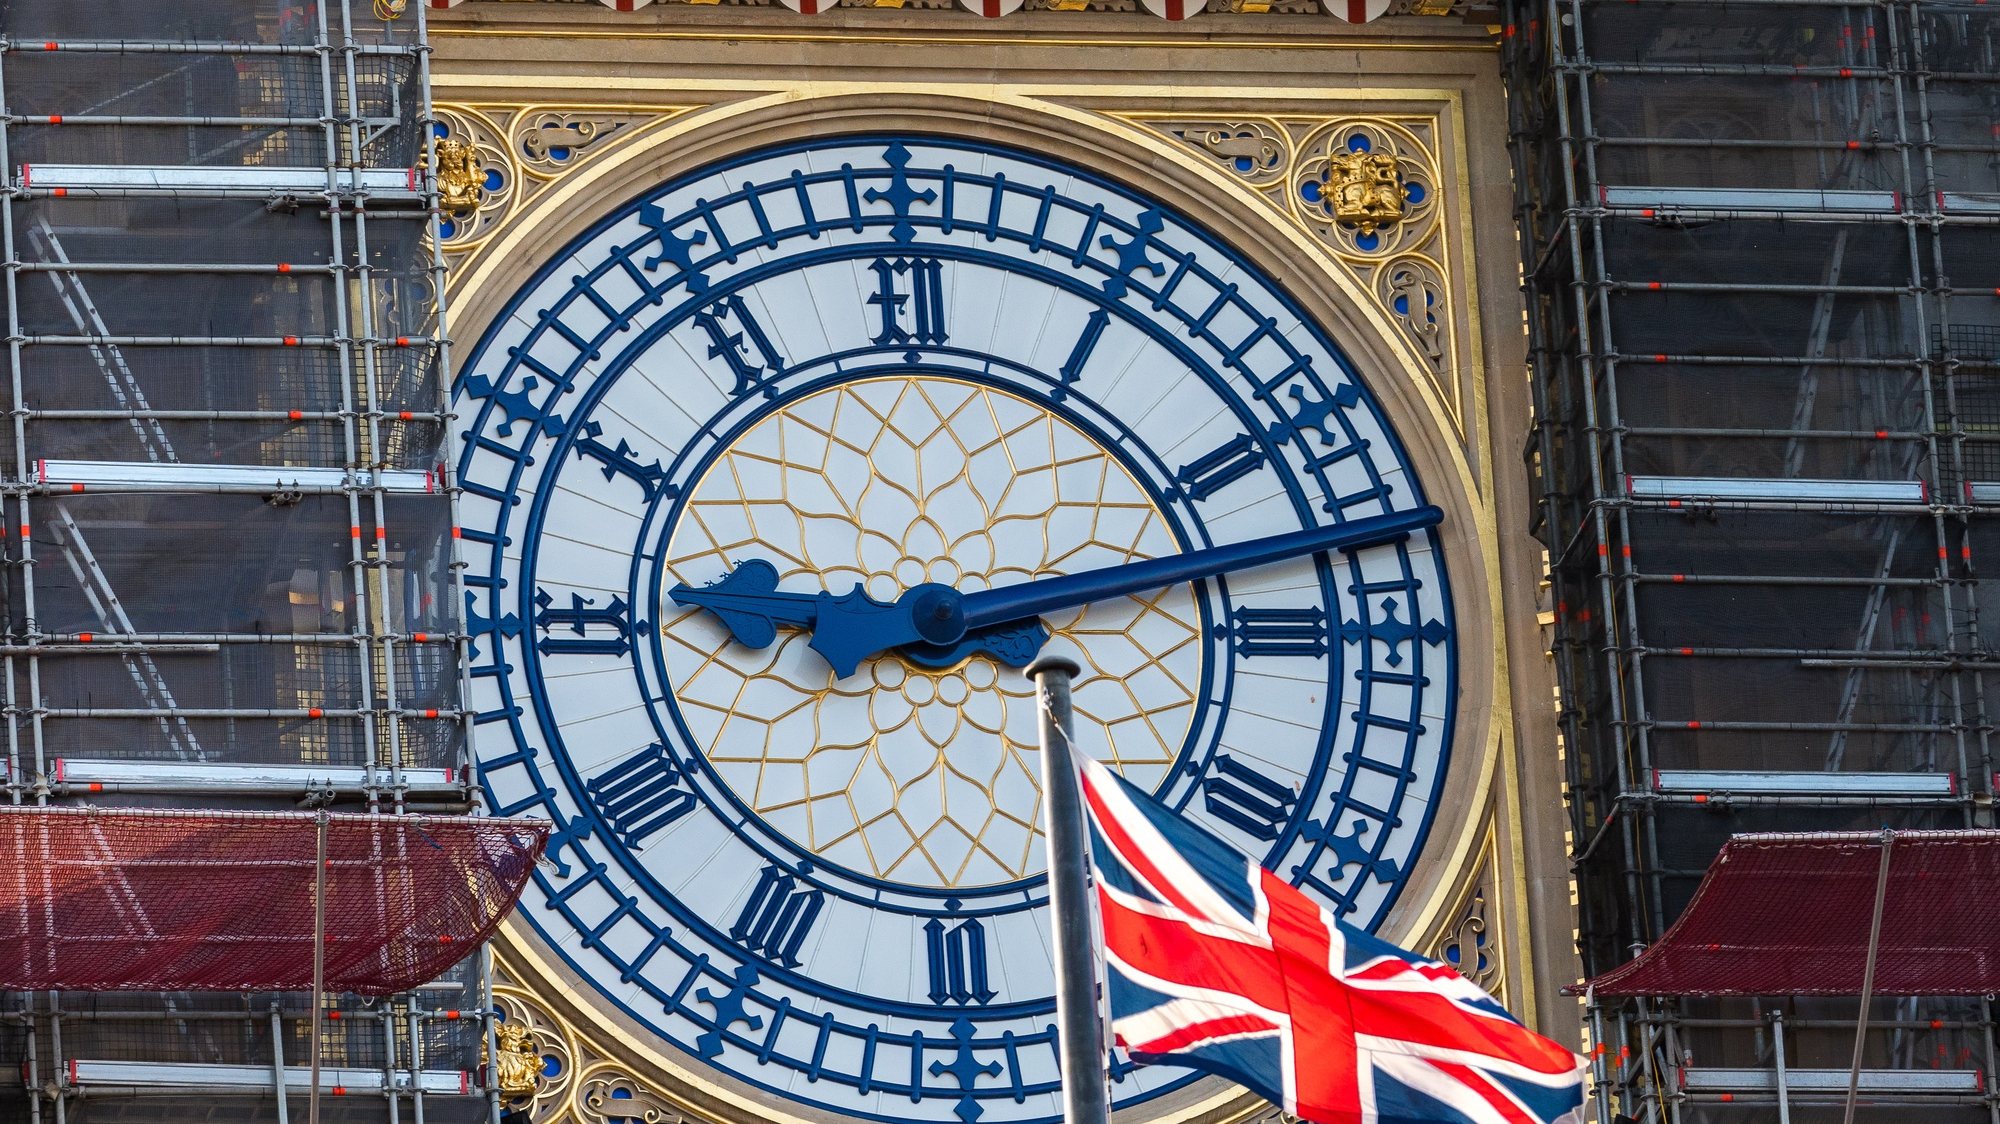 epa08863203 A Union Jack flag waves next to the clock face of Big Ben in Westminster, London, Britain, 05 December 2020. British and EU negotiators have paused Brexit talks because they say significant divergences remain and the conditions for a deal between the two sides have not been met.  EPA/VICKIE FLORES